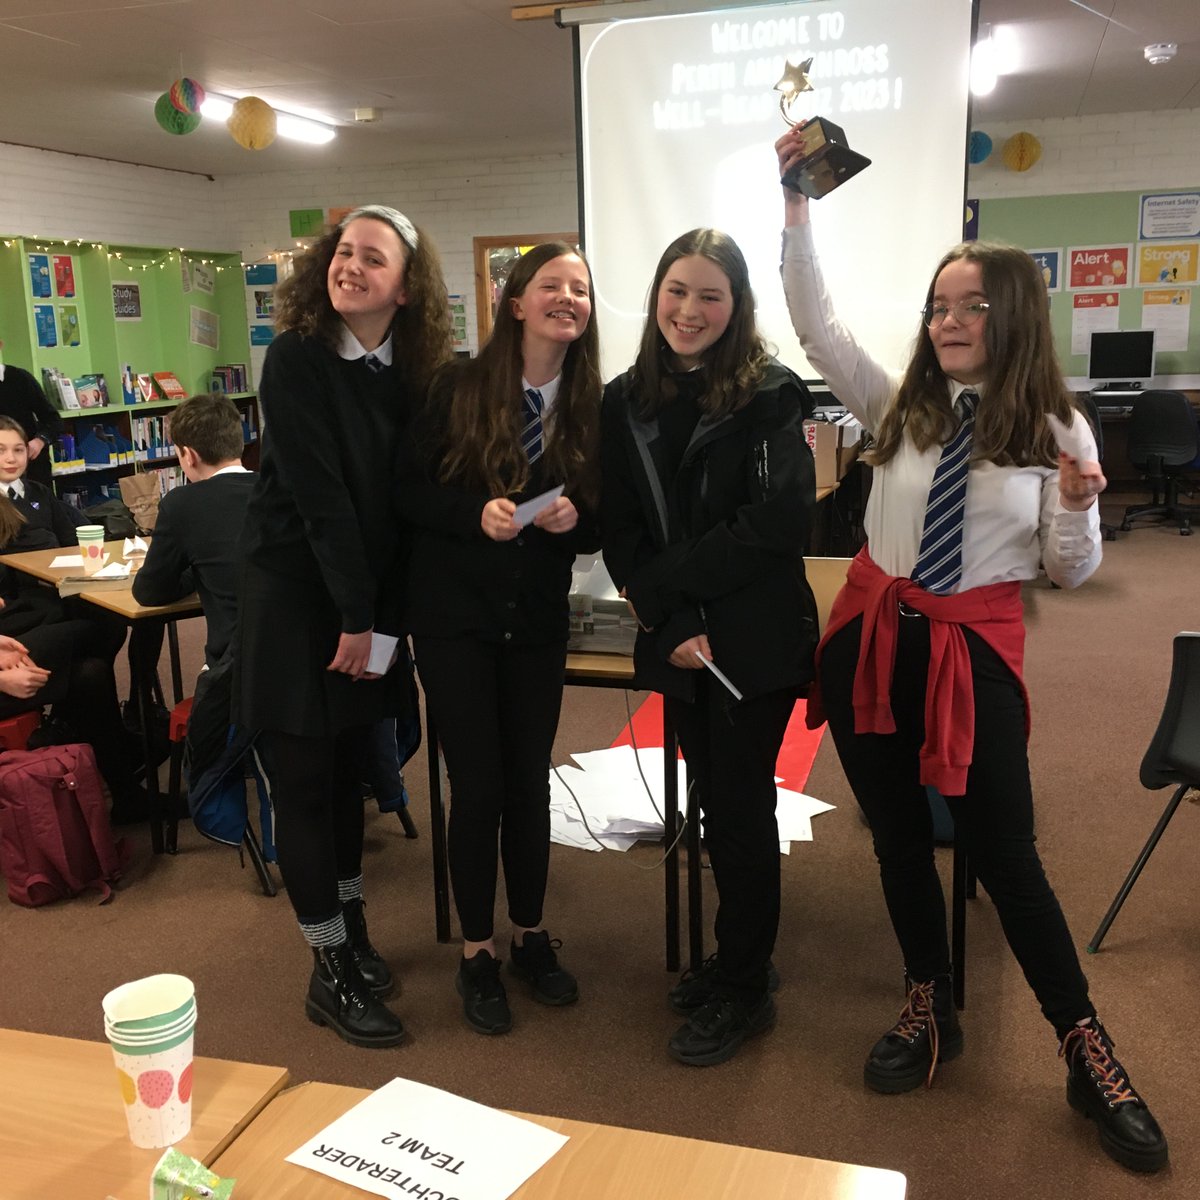 Team #perthacademy is looking forward to the Well-Read quiz tomorrow @PHSLibrary6! The trophy is packed and ready to go. See last year's winning team below!  Thanks to the #PerthRotaryClub for sponsorship. #GreatSchLibs #readingforpleasure